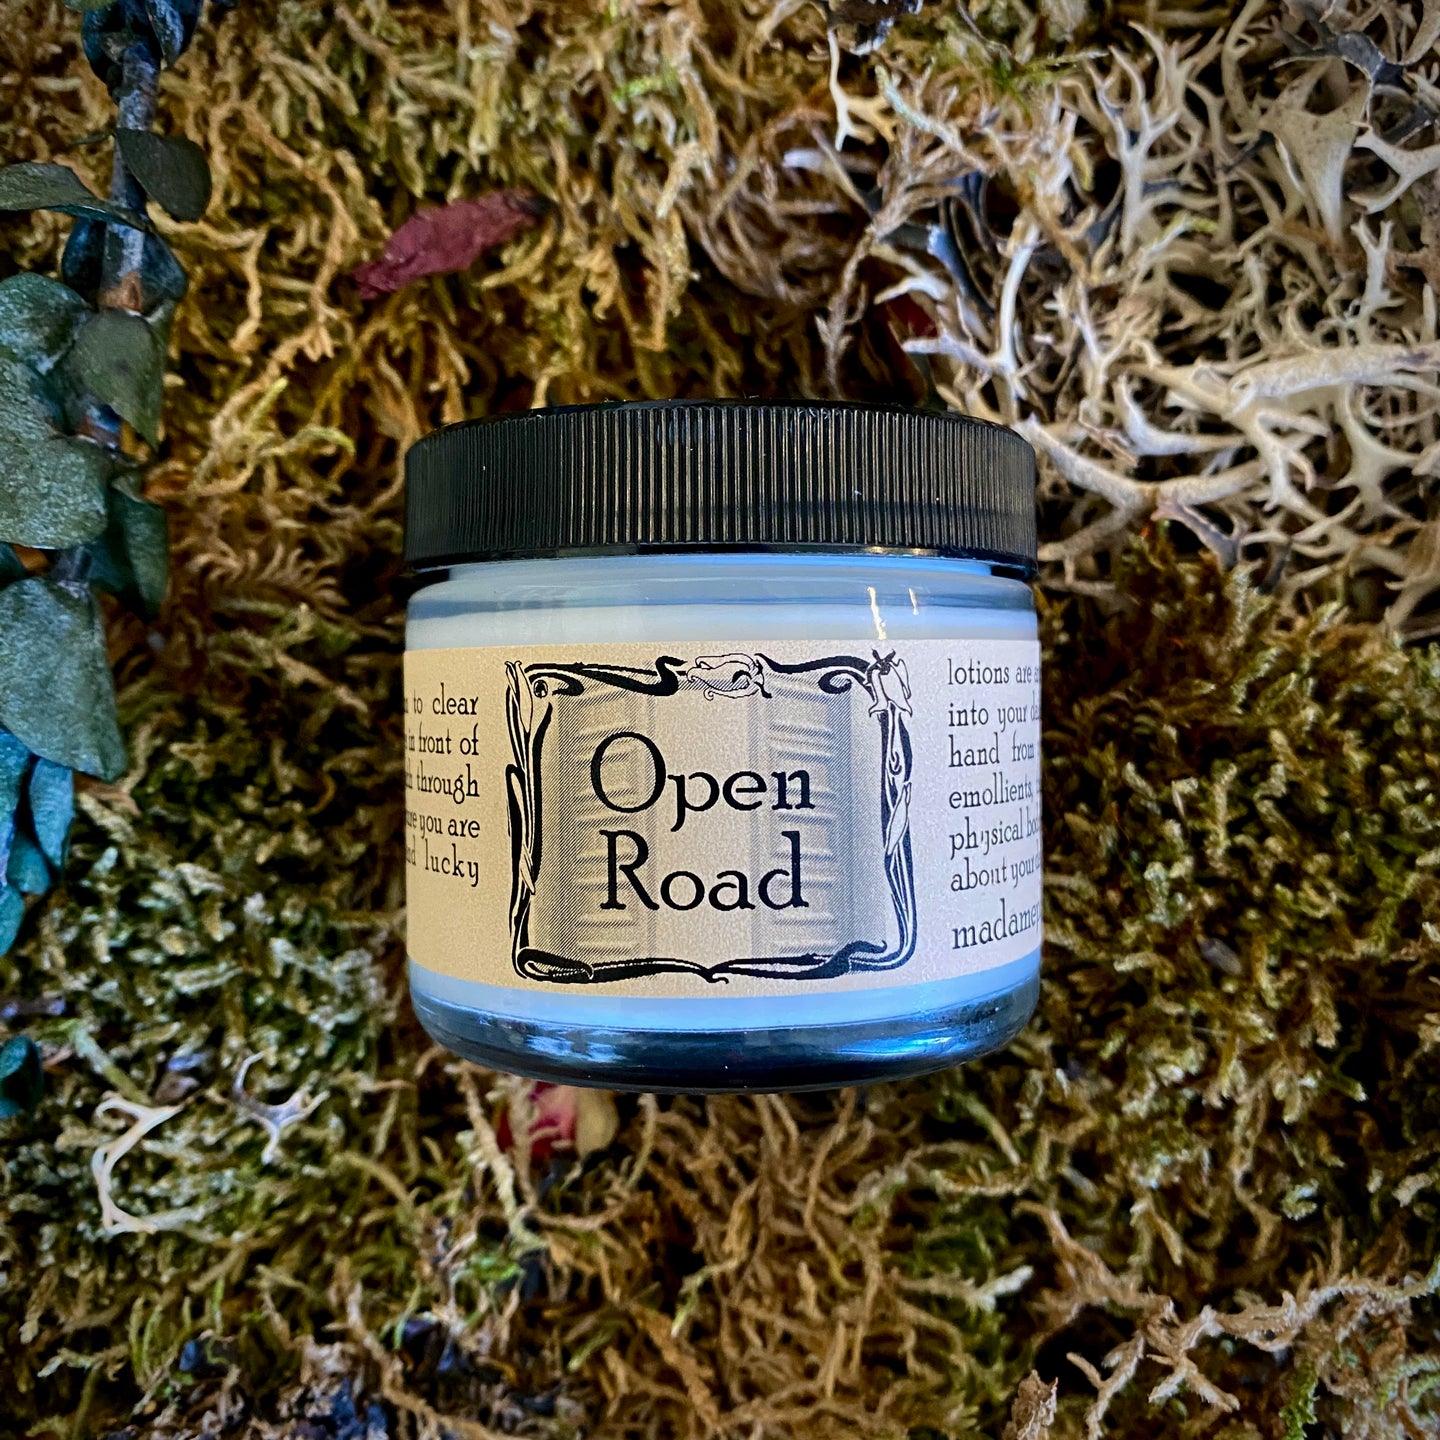 Open Road Magical Spell Lotion